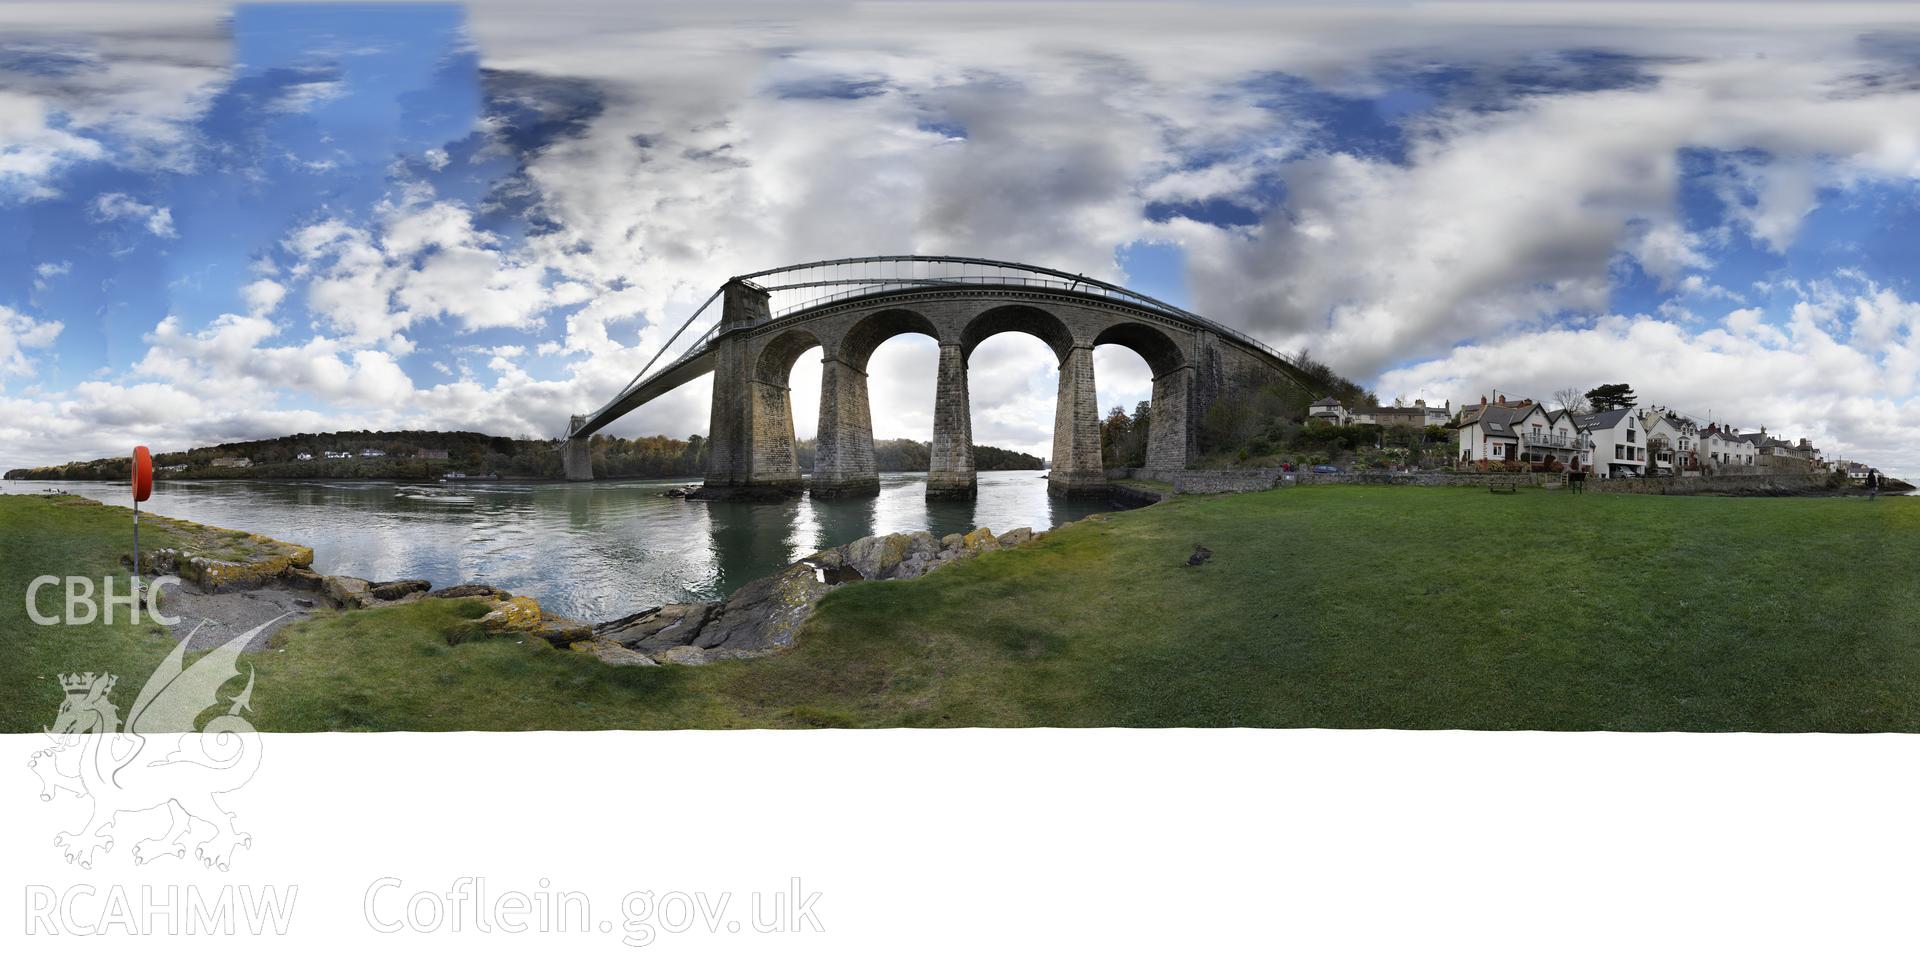 Reduced resolution .tiff file of stitched images from the Menai Bridge gigapan project, carried out by Scott Lloyd and Rita Singer, October 2017. An uncropped image required for panotour.